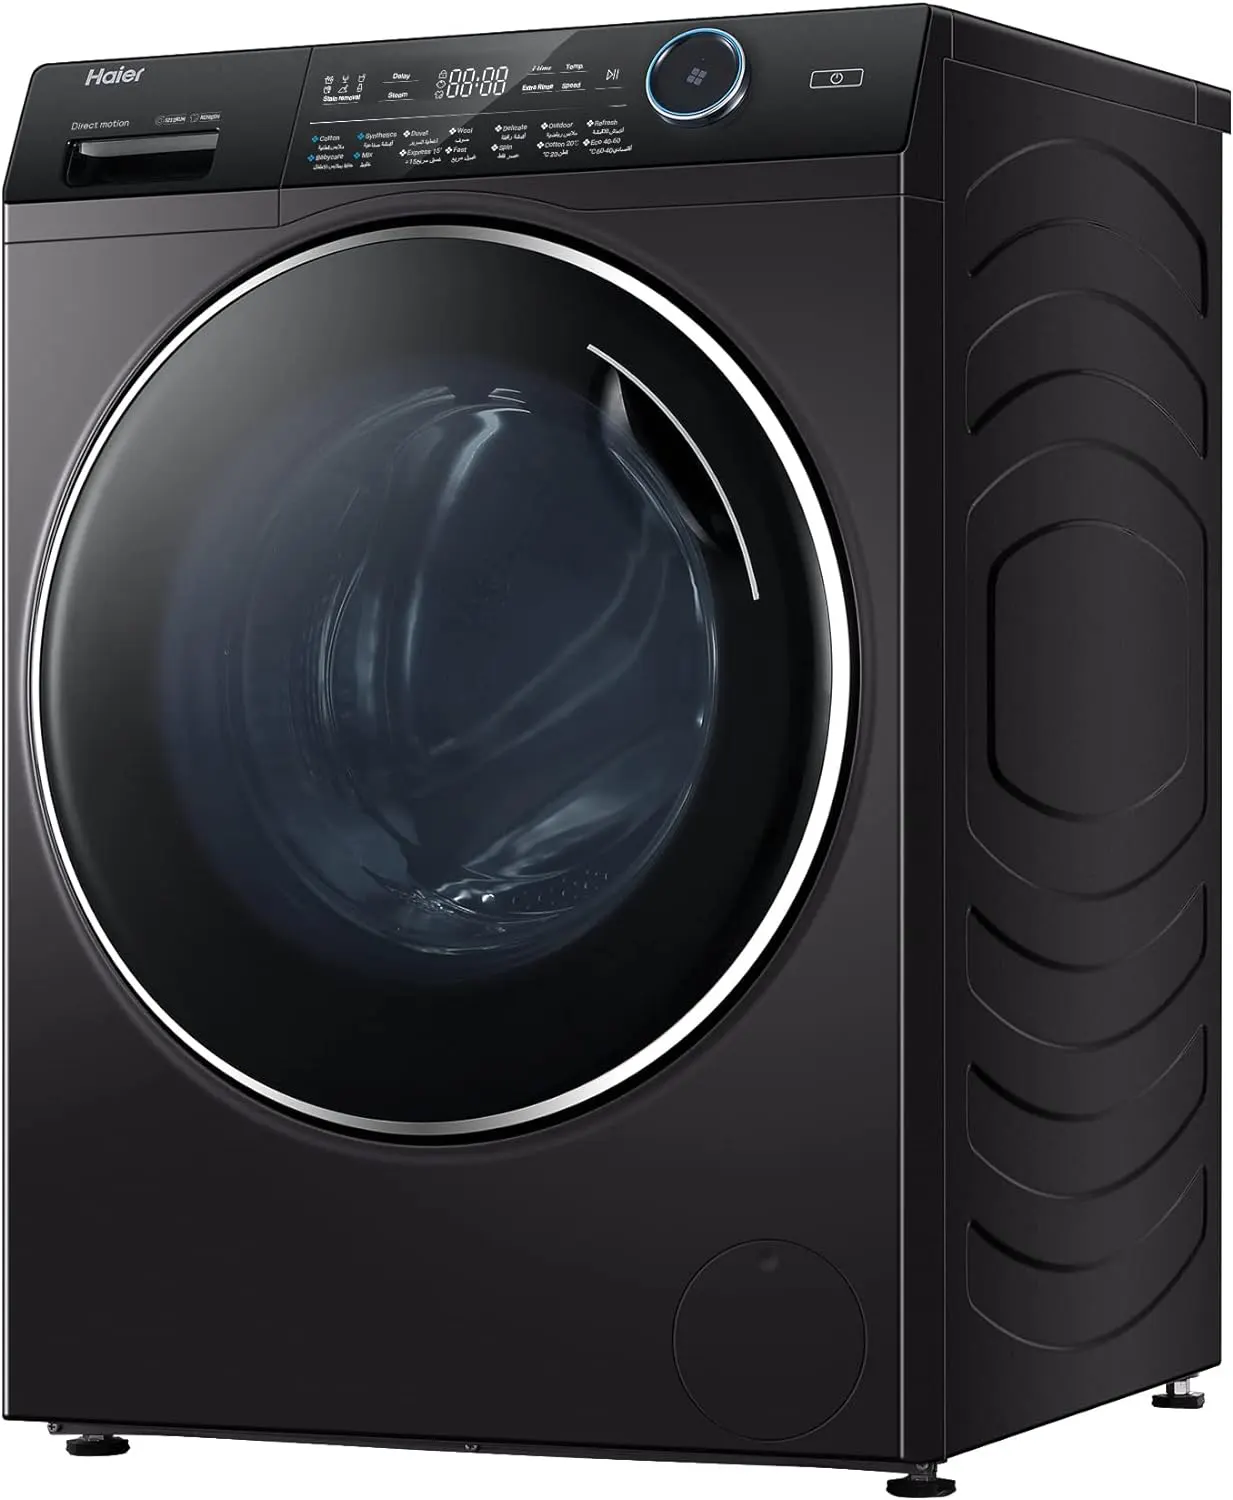 Haier Front Loading Fully Automatic Washing Machine 10 KG, Inverter, Steam, Silver, HW100-B14979S8